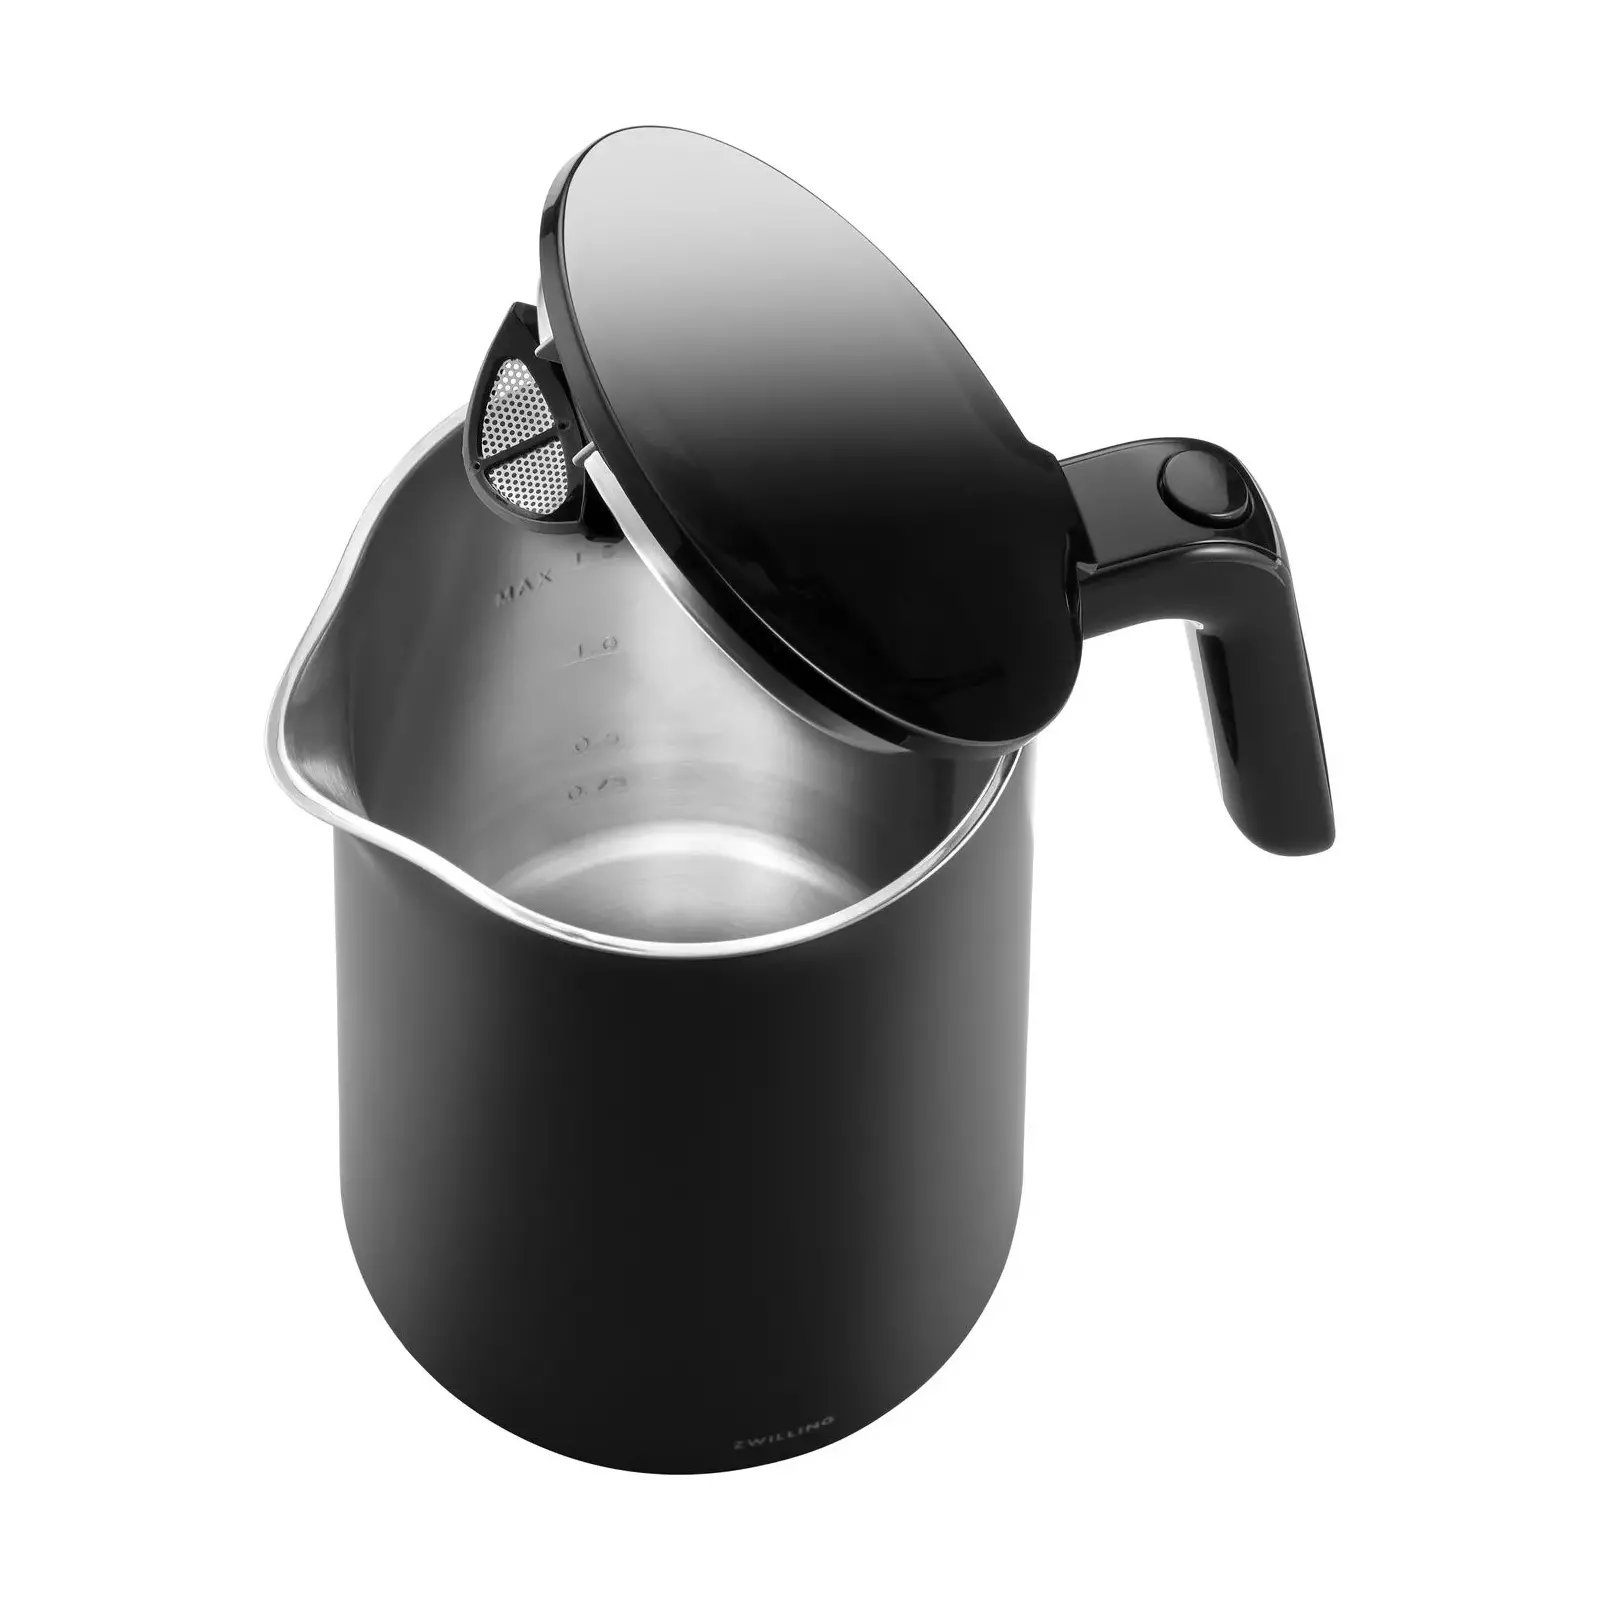 ZWILLING Twins Enfinigy electric kettle 53006-002-0, Kettles